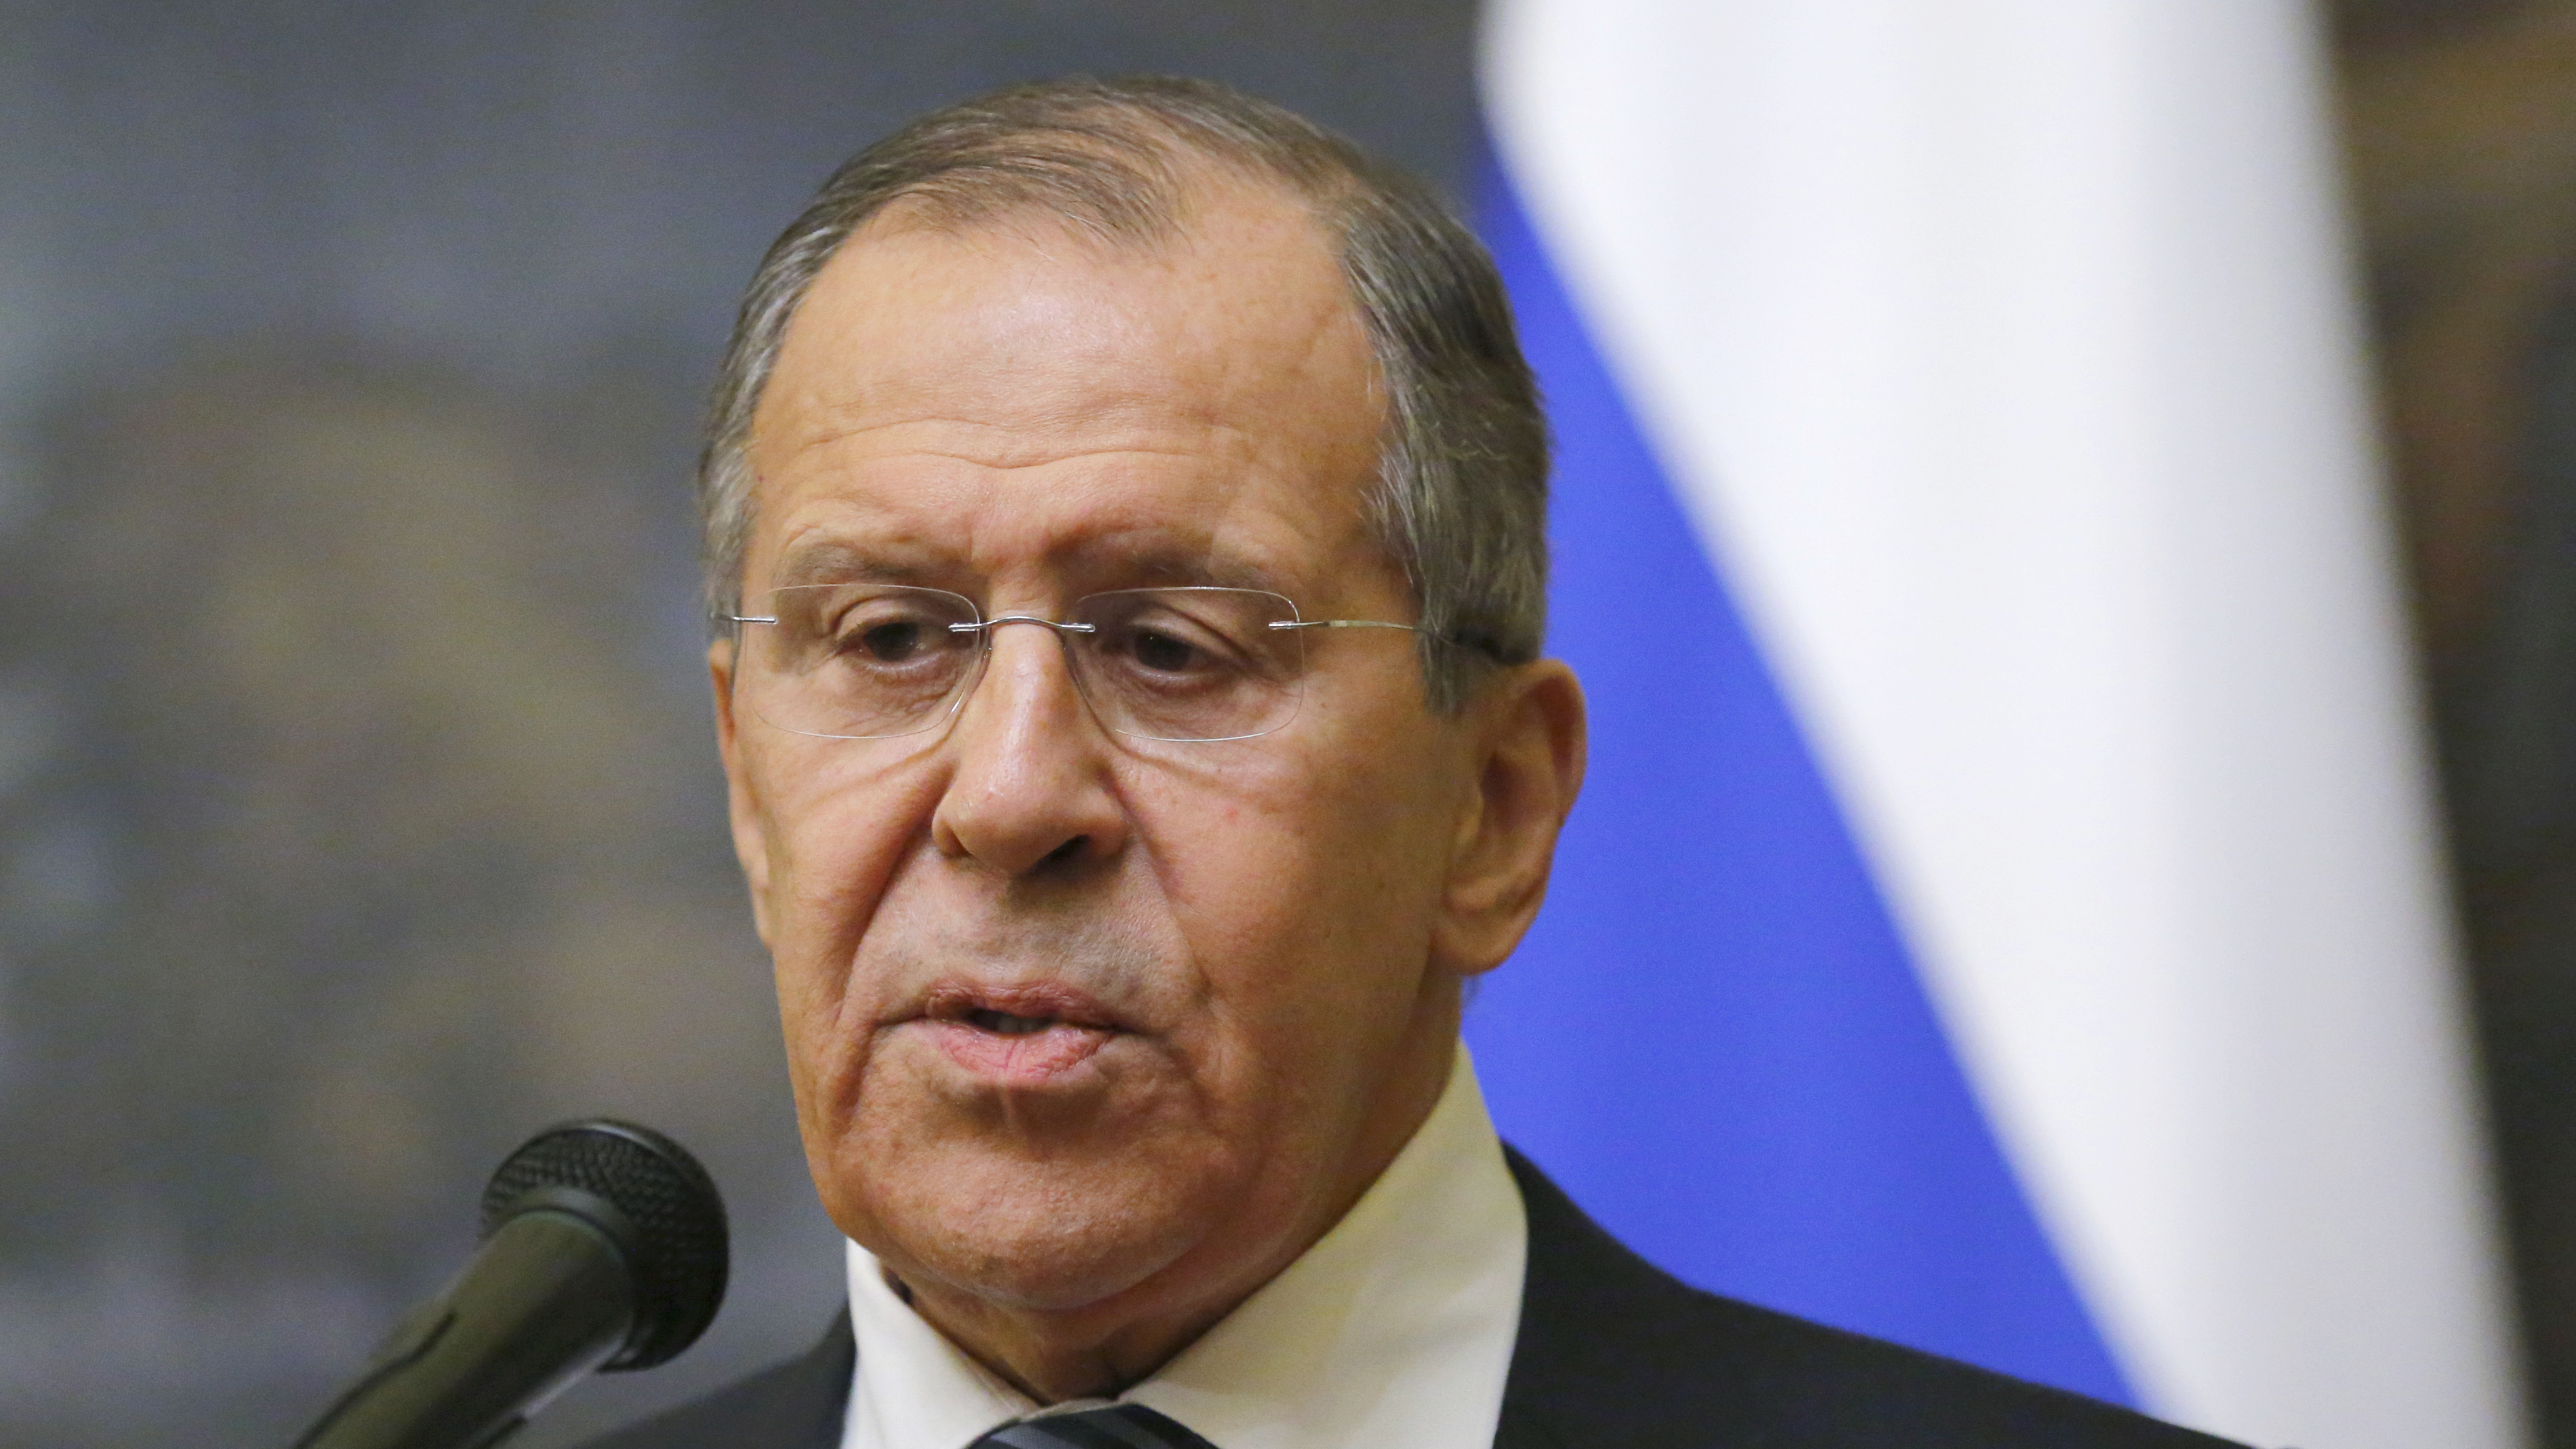 Russian Foreign Minister Sergey Lavrov announced Thursday that Moscow is expelling 60 U.S. diplomats.
